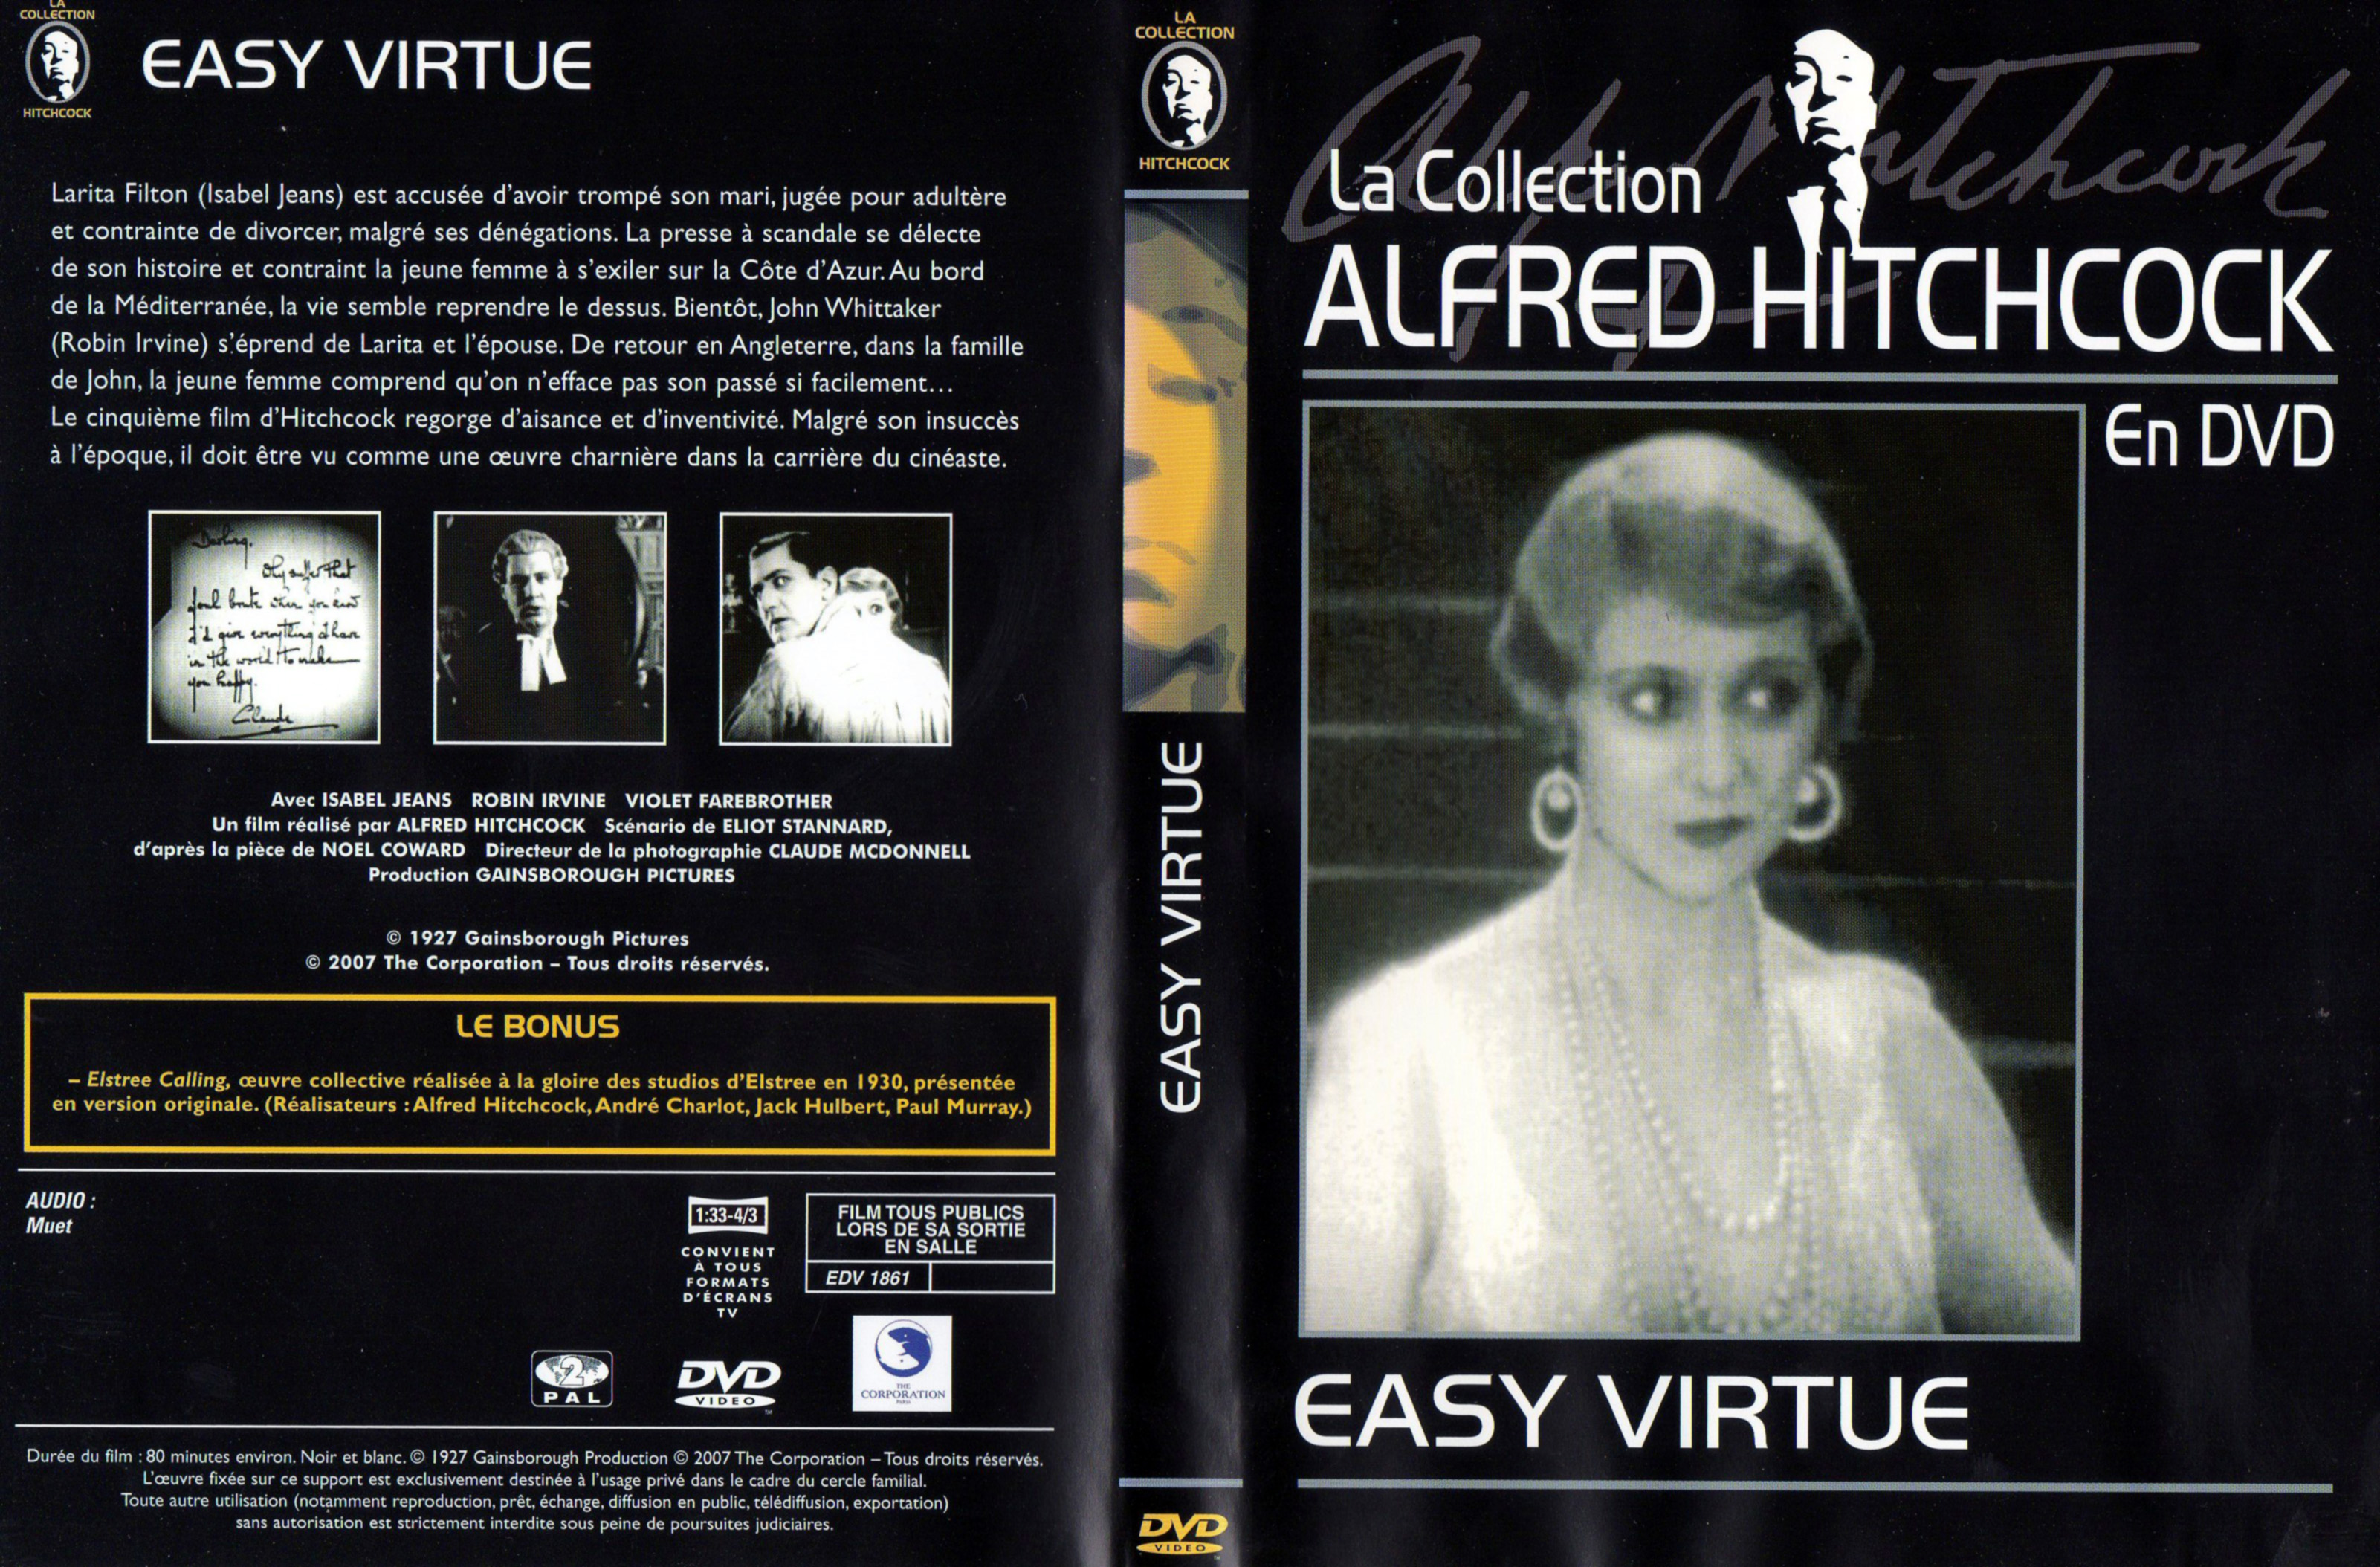 Jaquette DVD Easy Virtue